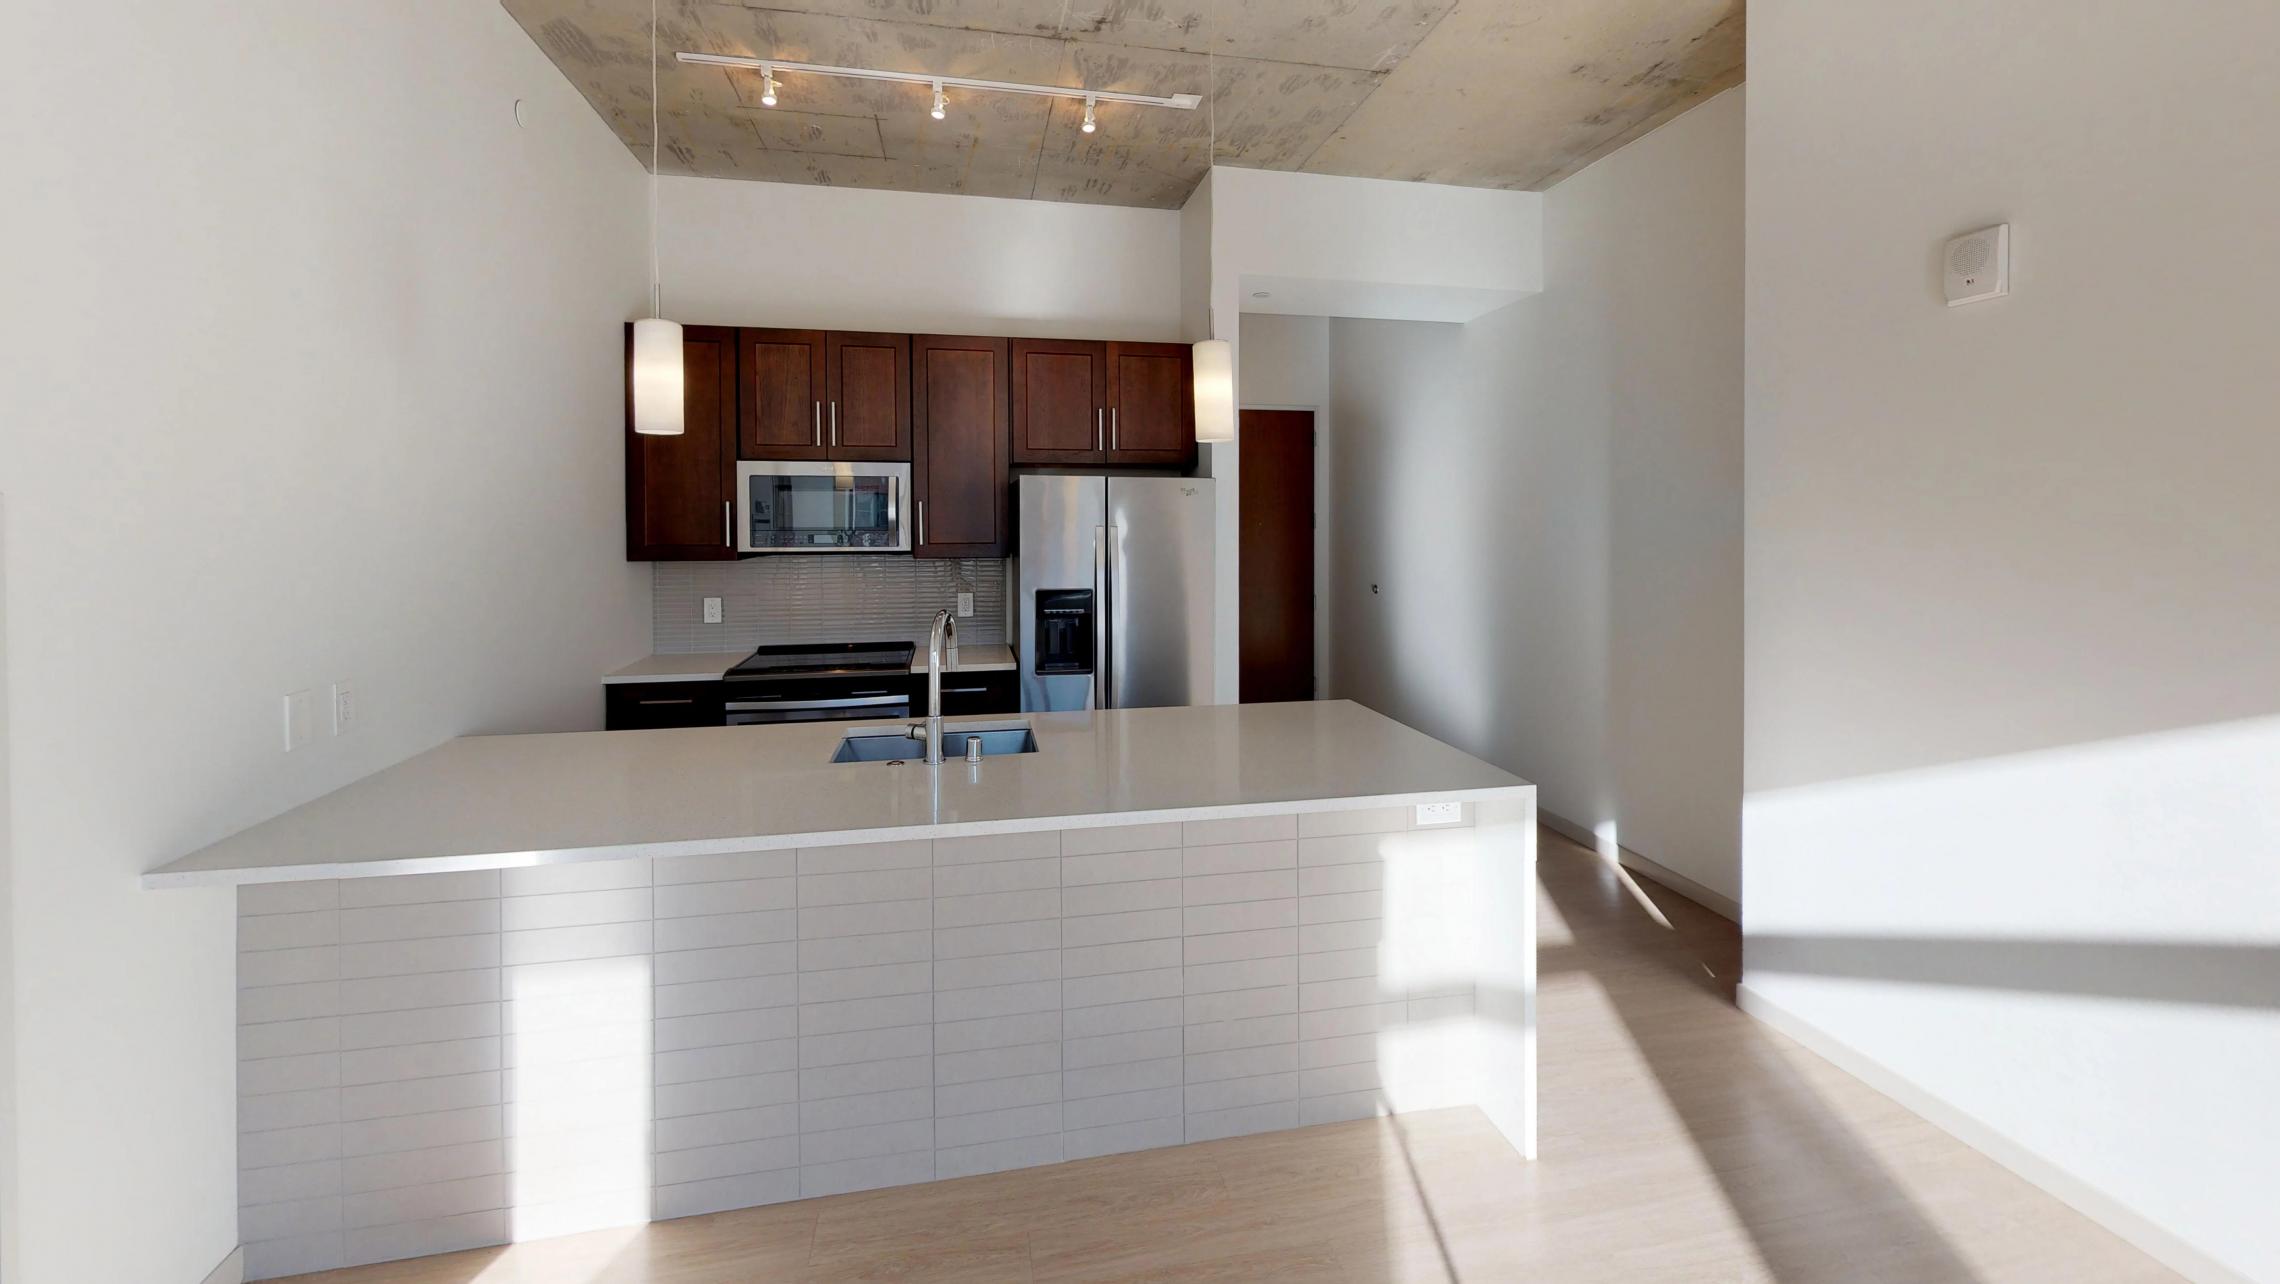 Pressman-211-Apartment-One-Bedroom-Luxury-Modern-Upscale-Downtown-Capitol-Concrete-Madison-Kitchen-Island-Living-Space-Sunny-Natural-Light